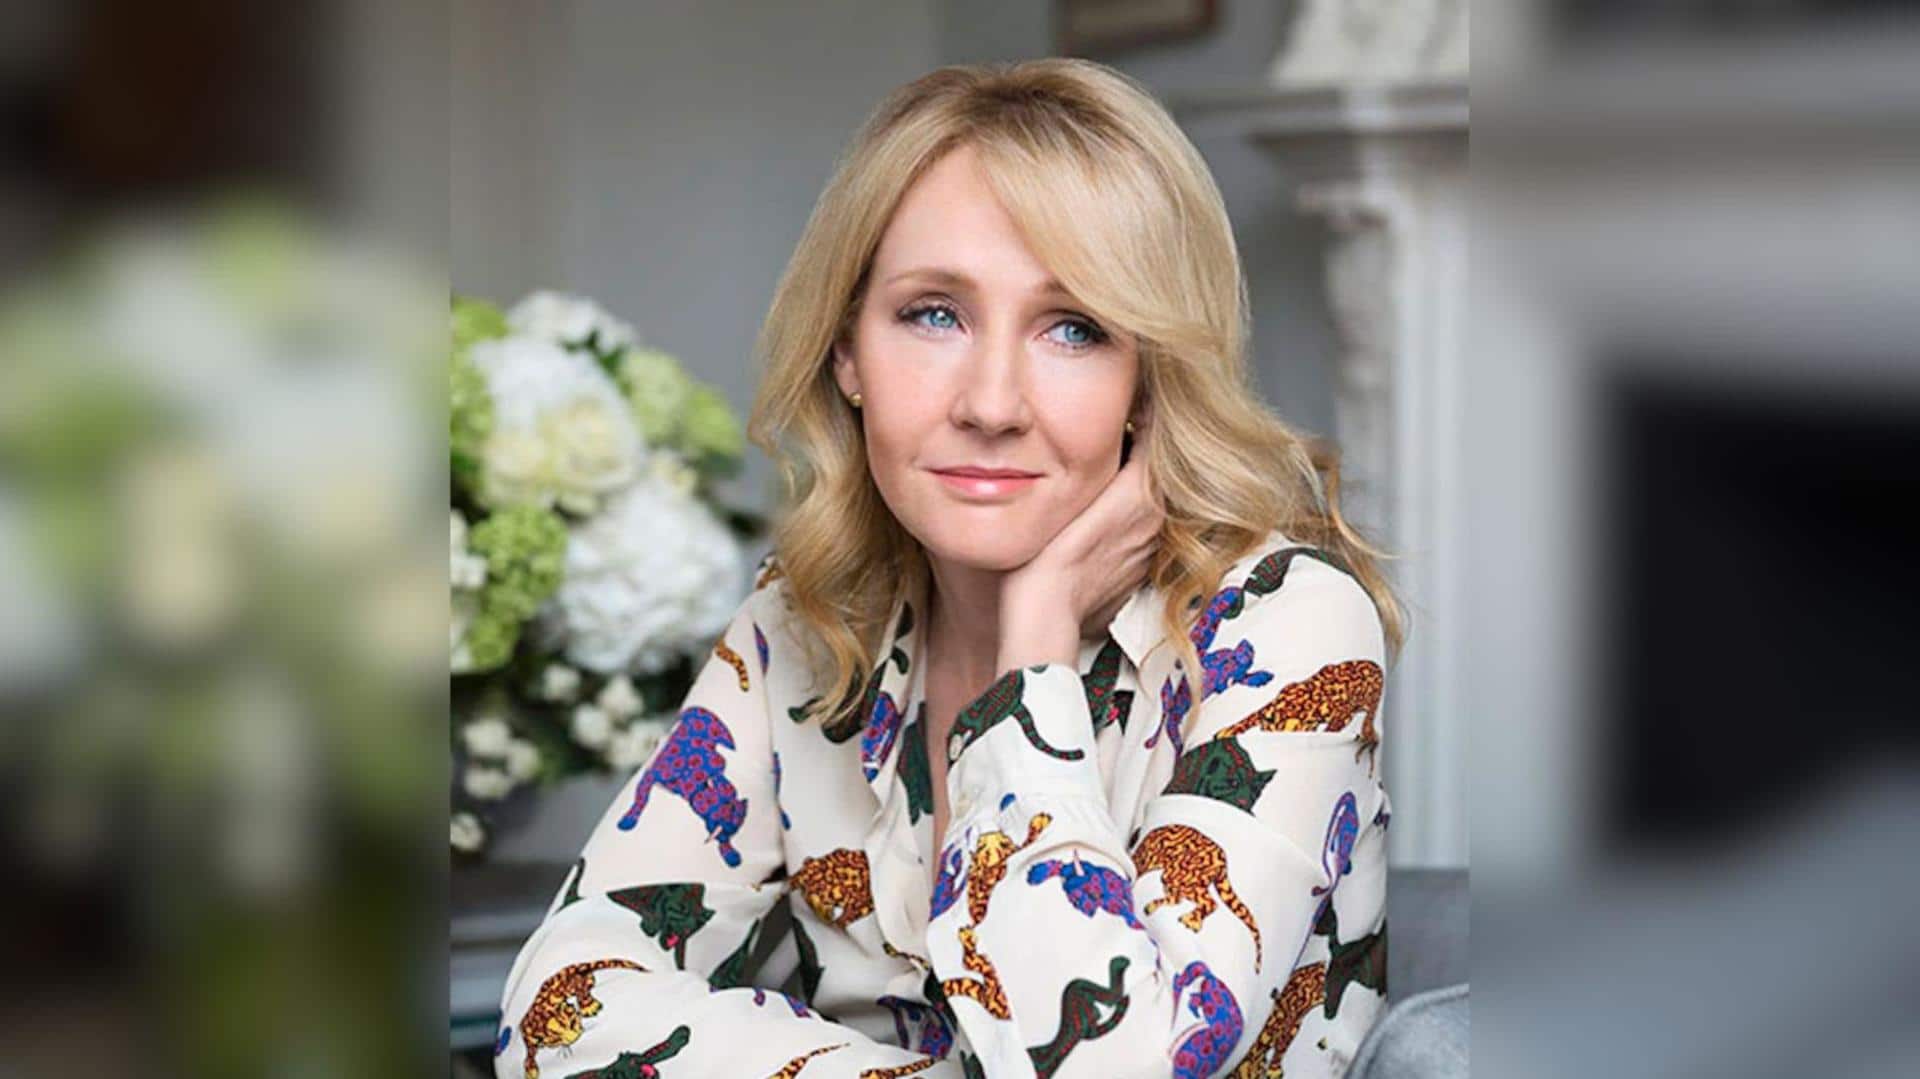 Will JK Rowling face arrest under hate law? Police clarify